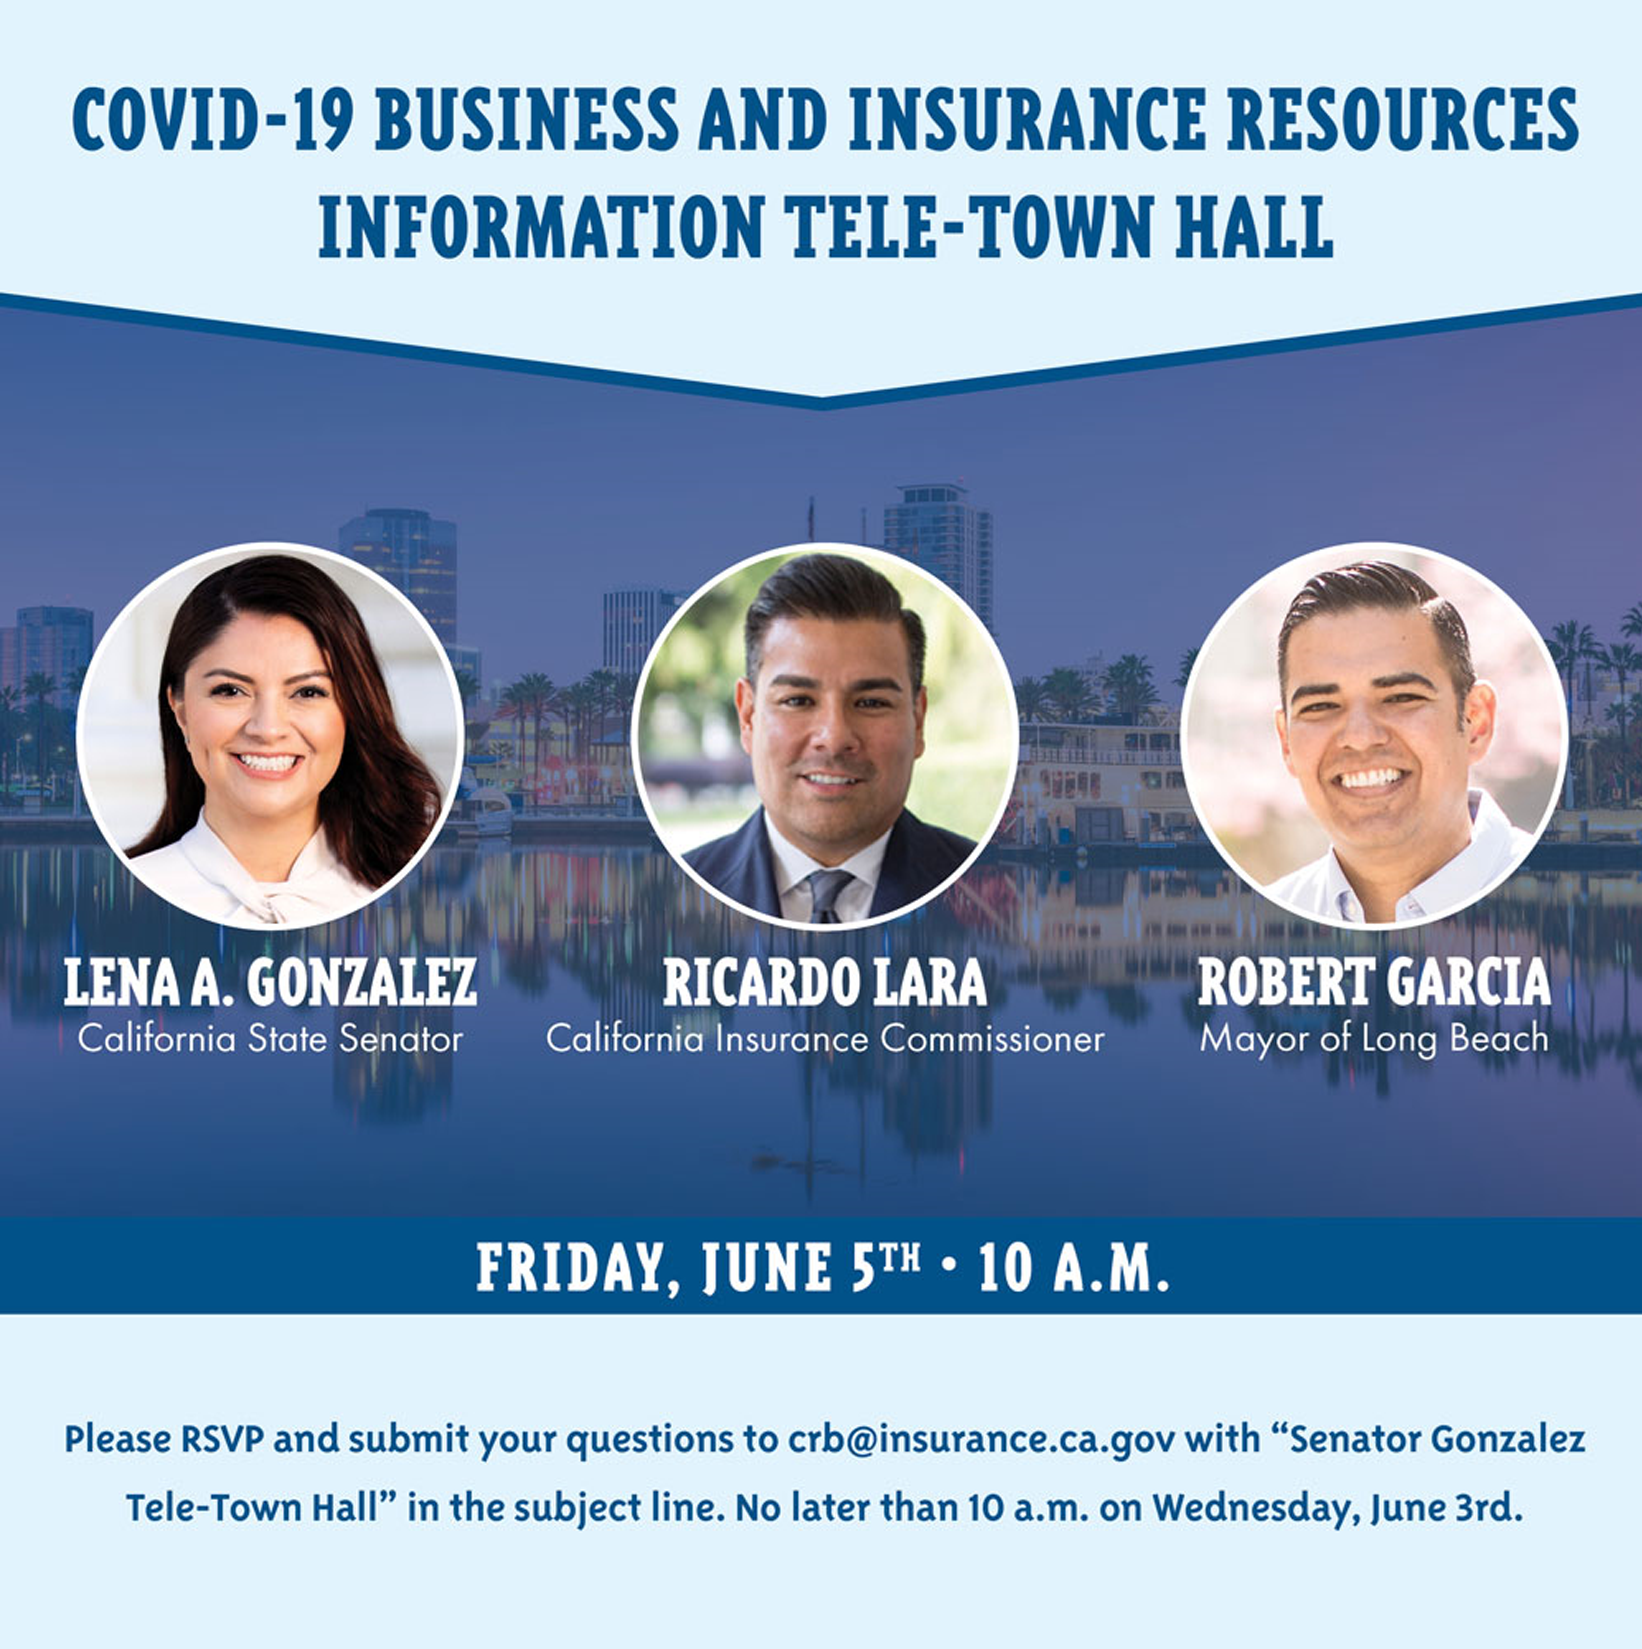 Flyer is an invitation from senator Lena Gonzalez to attend a teleconference on June 5th, 2020 at 10am hosted by Commissioner Ricardo Lara